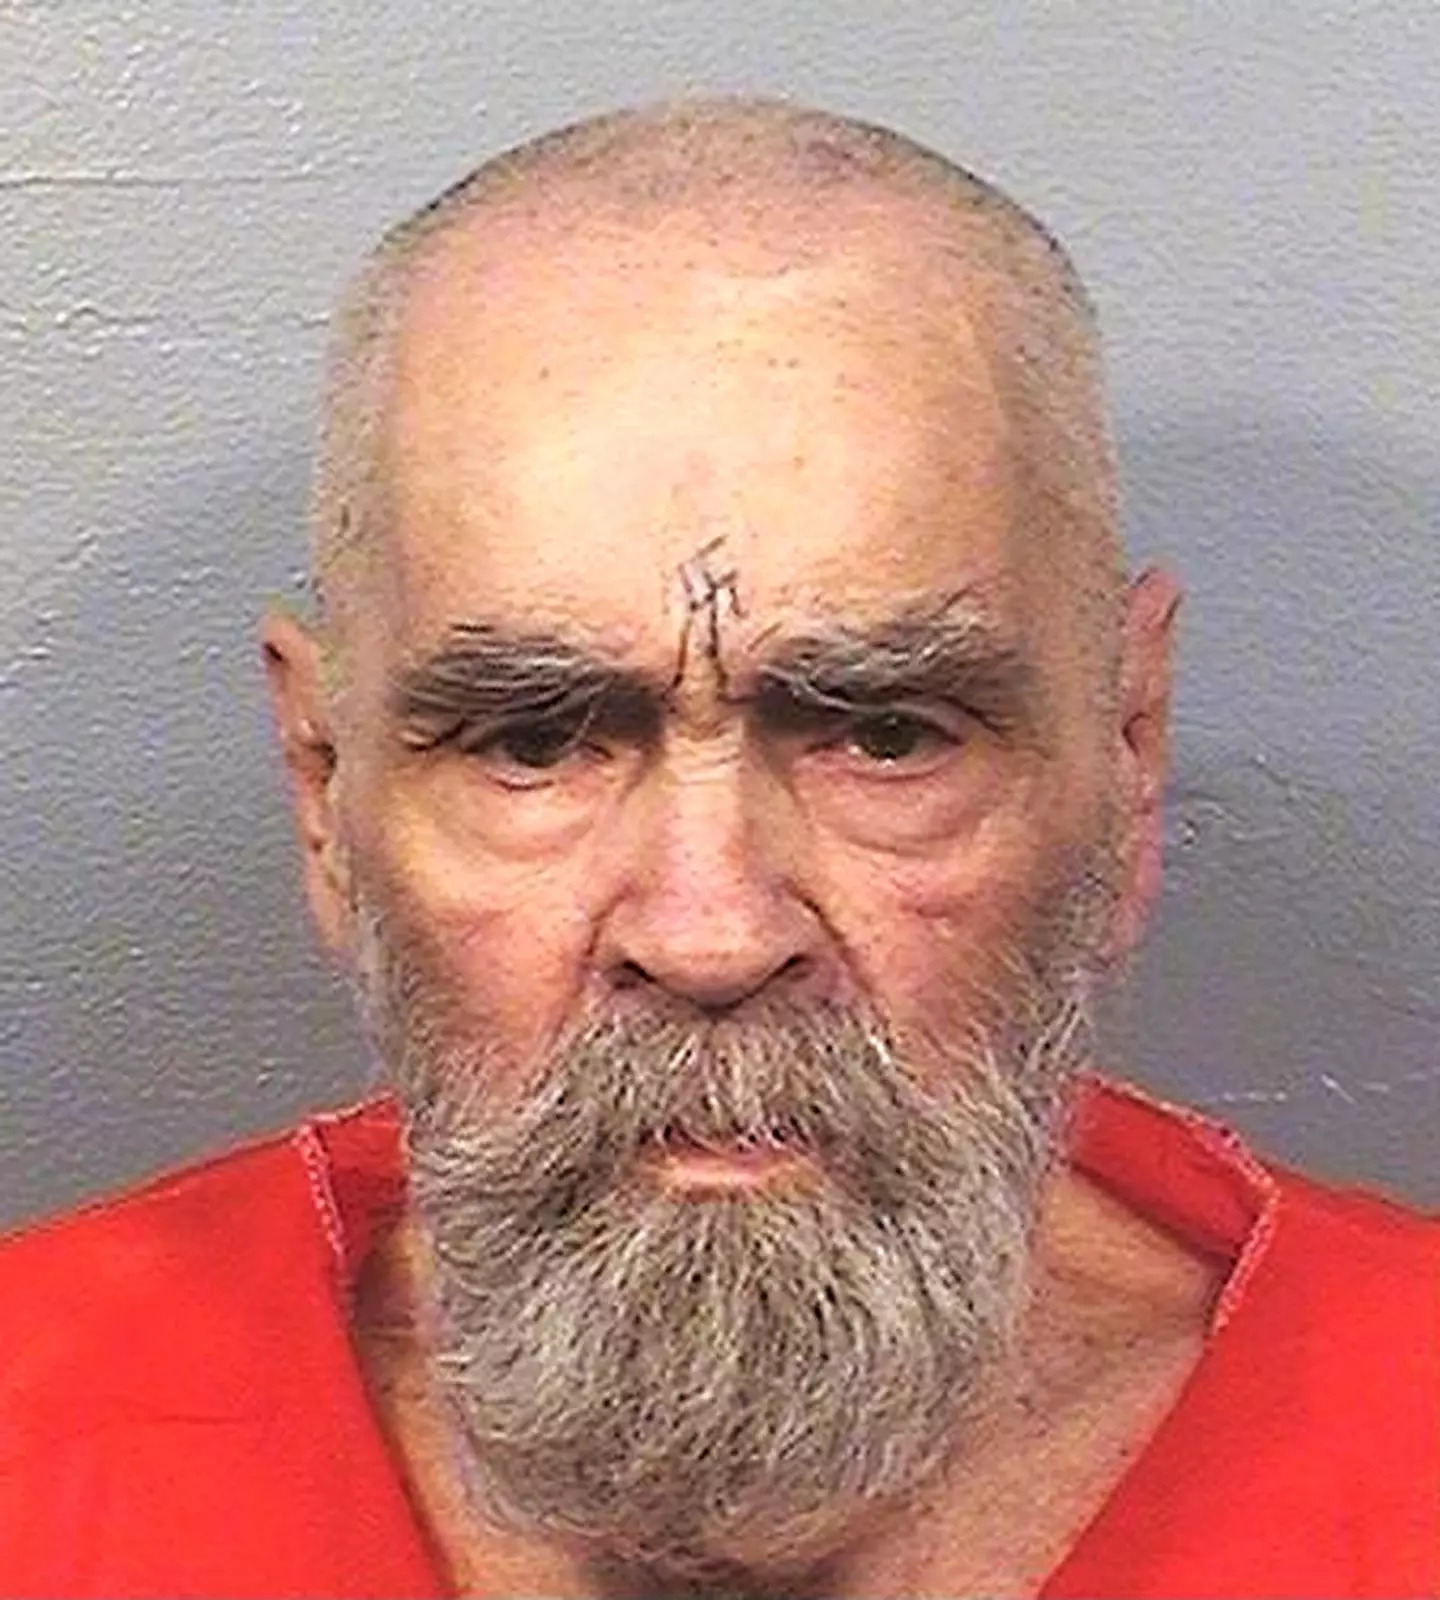 Charles Manson encouraged his followers to carry out a murder spree.